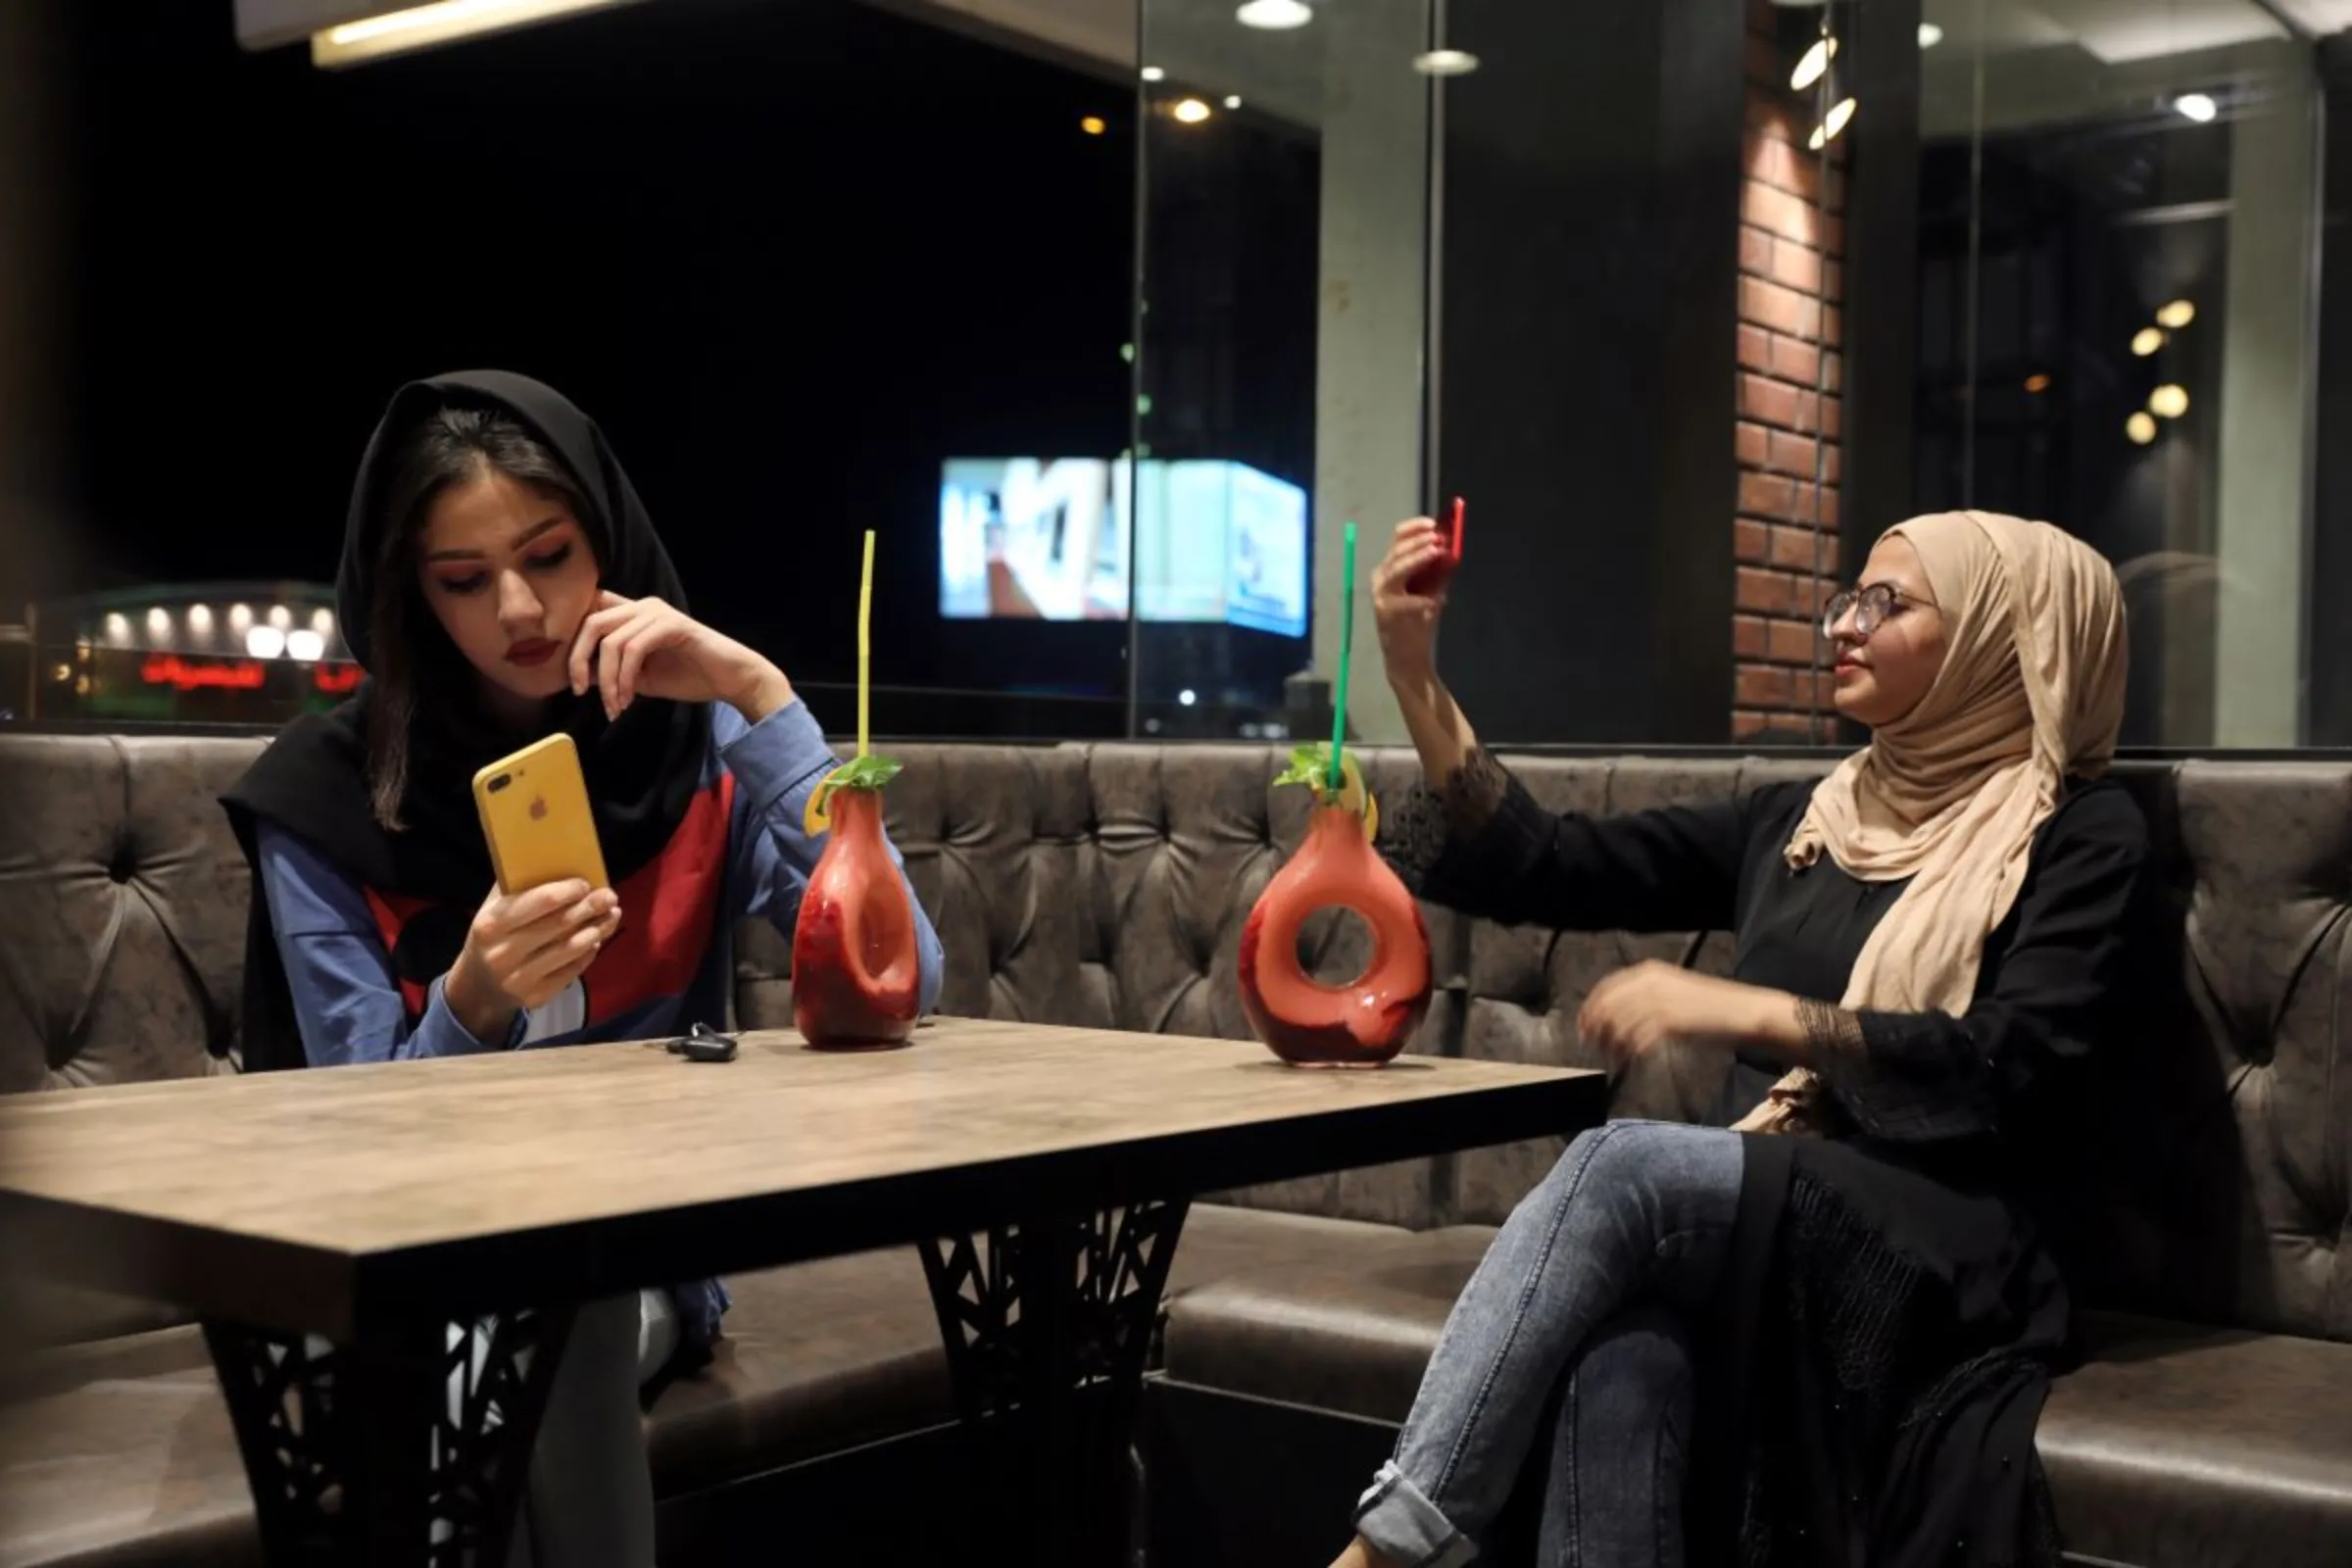 Iraqi girls use their phones at a cafe in Kerbala, Iraq August 6, 2019. Picture taken August 6, 2019. REUTERS/Abdullah Dhiaa Al-Deen